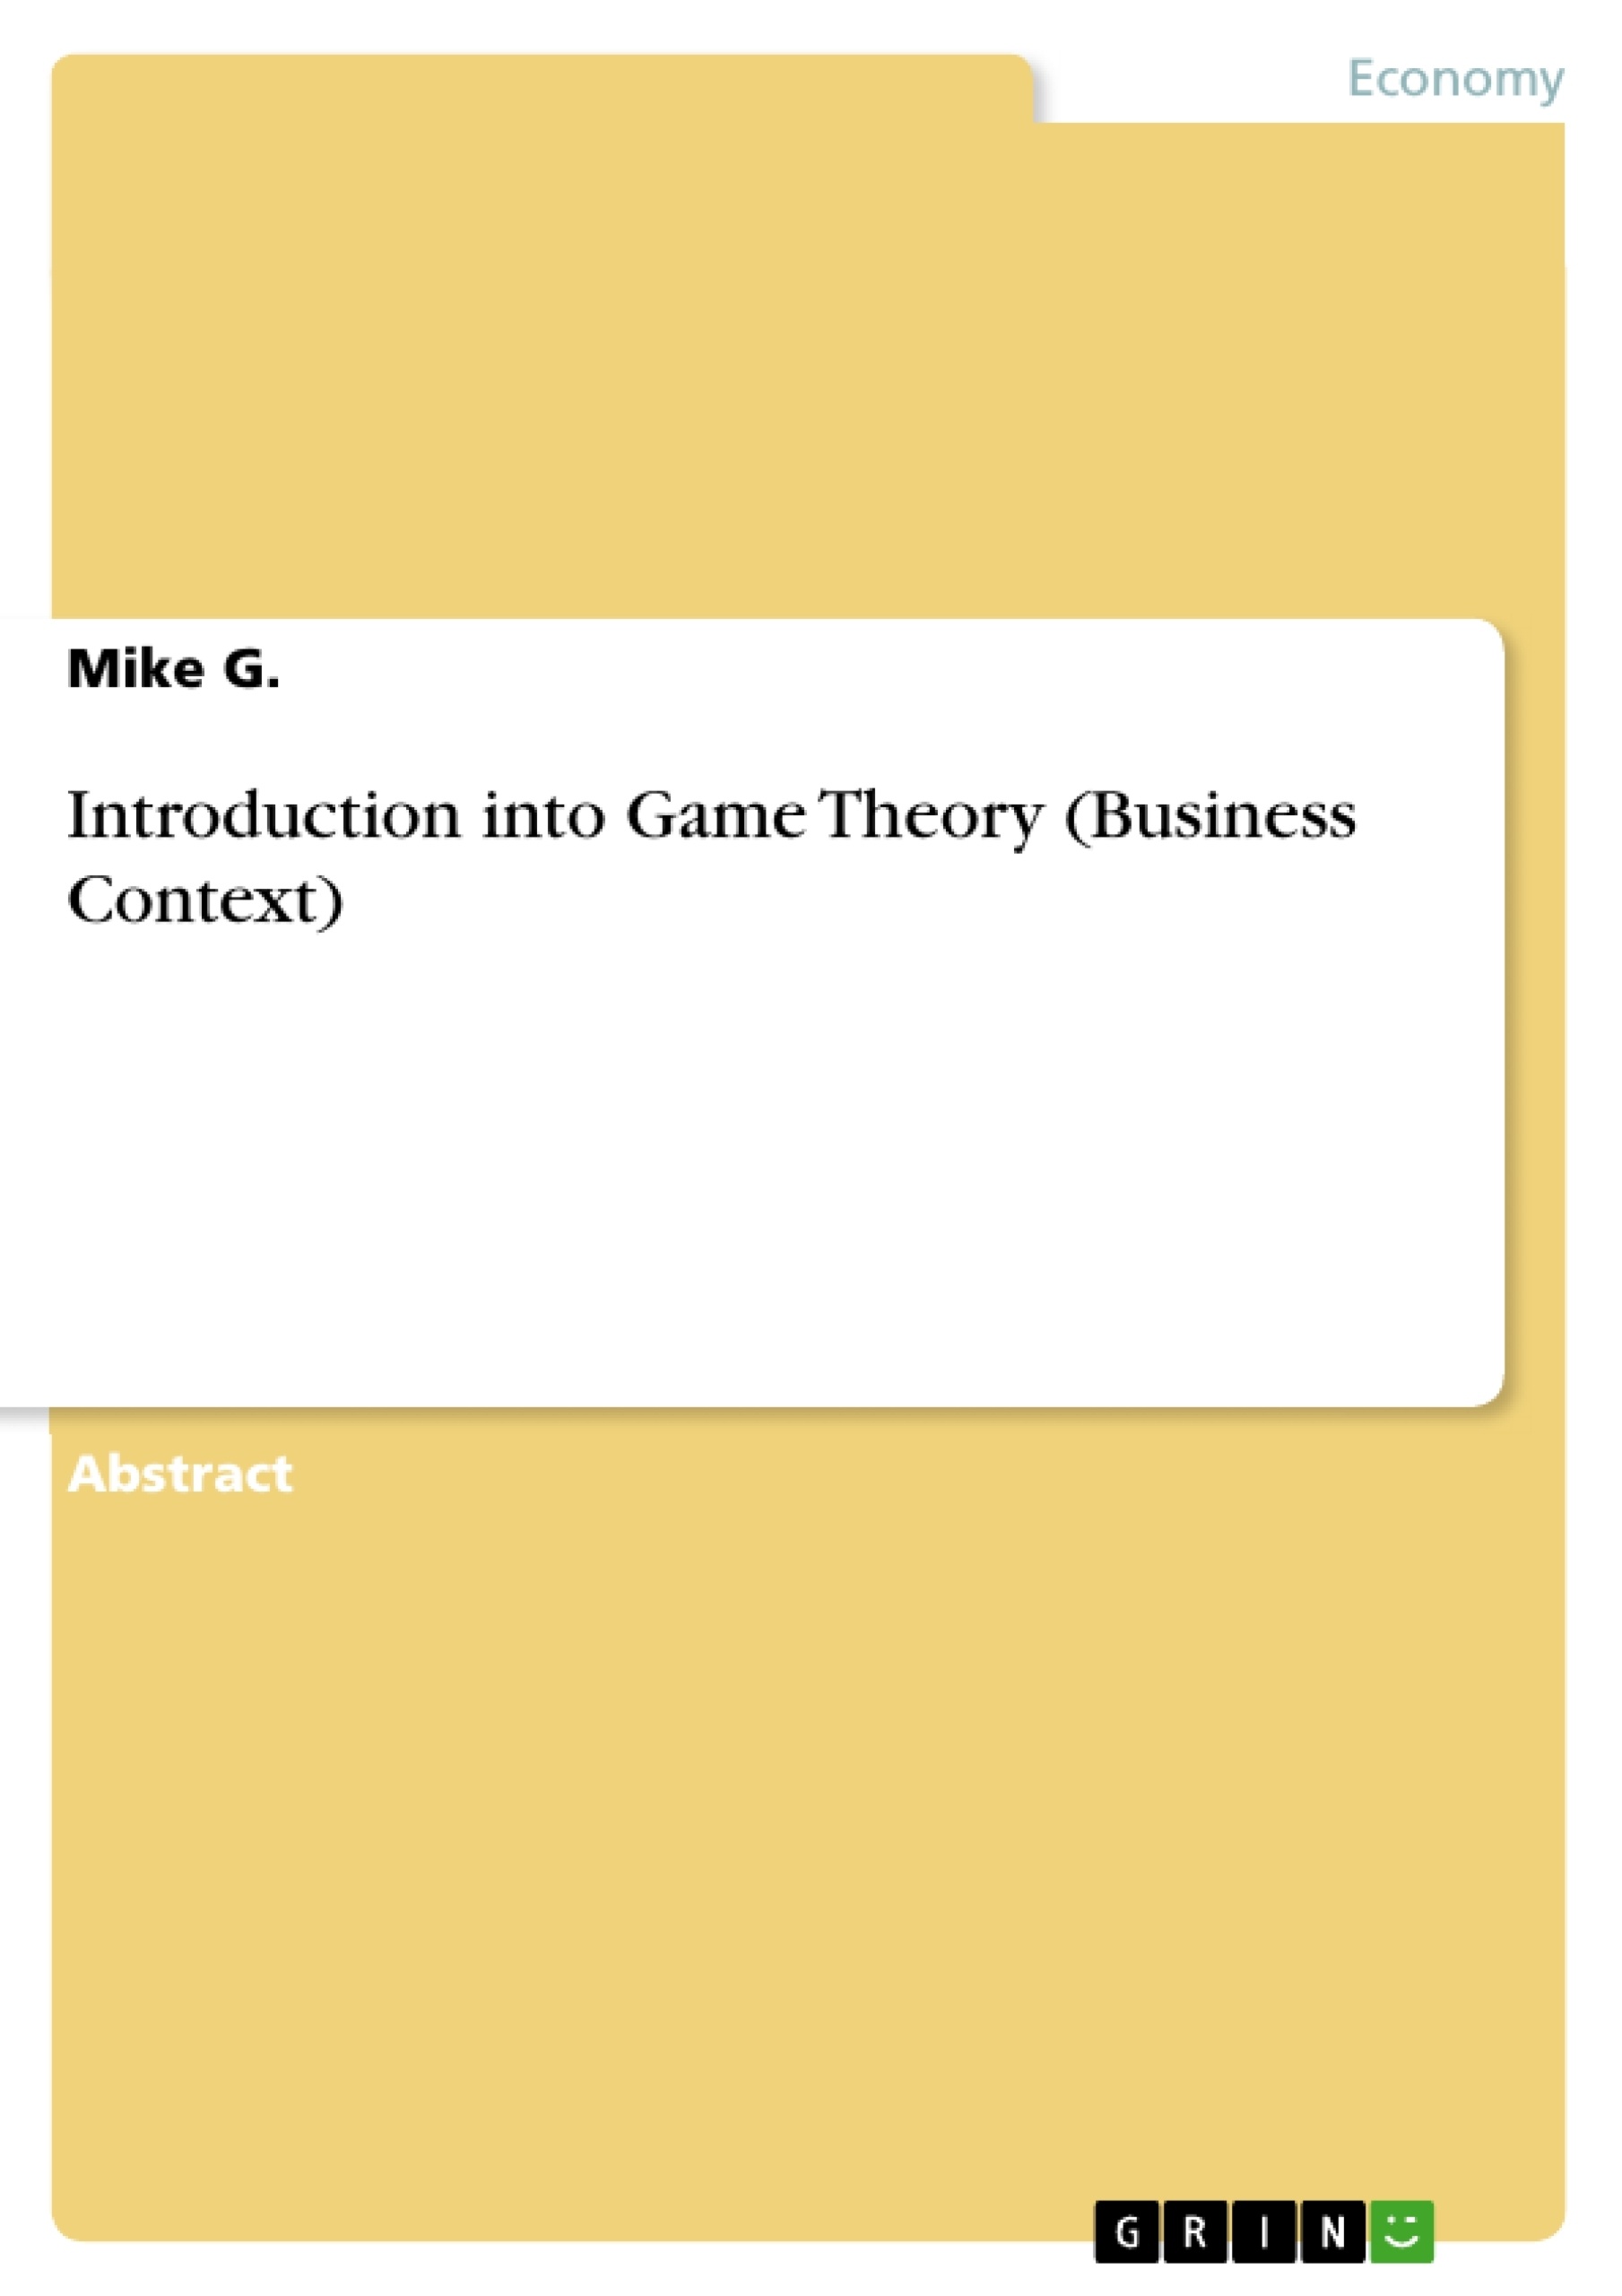 Title: Introduction into Game Theory (Business Context)